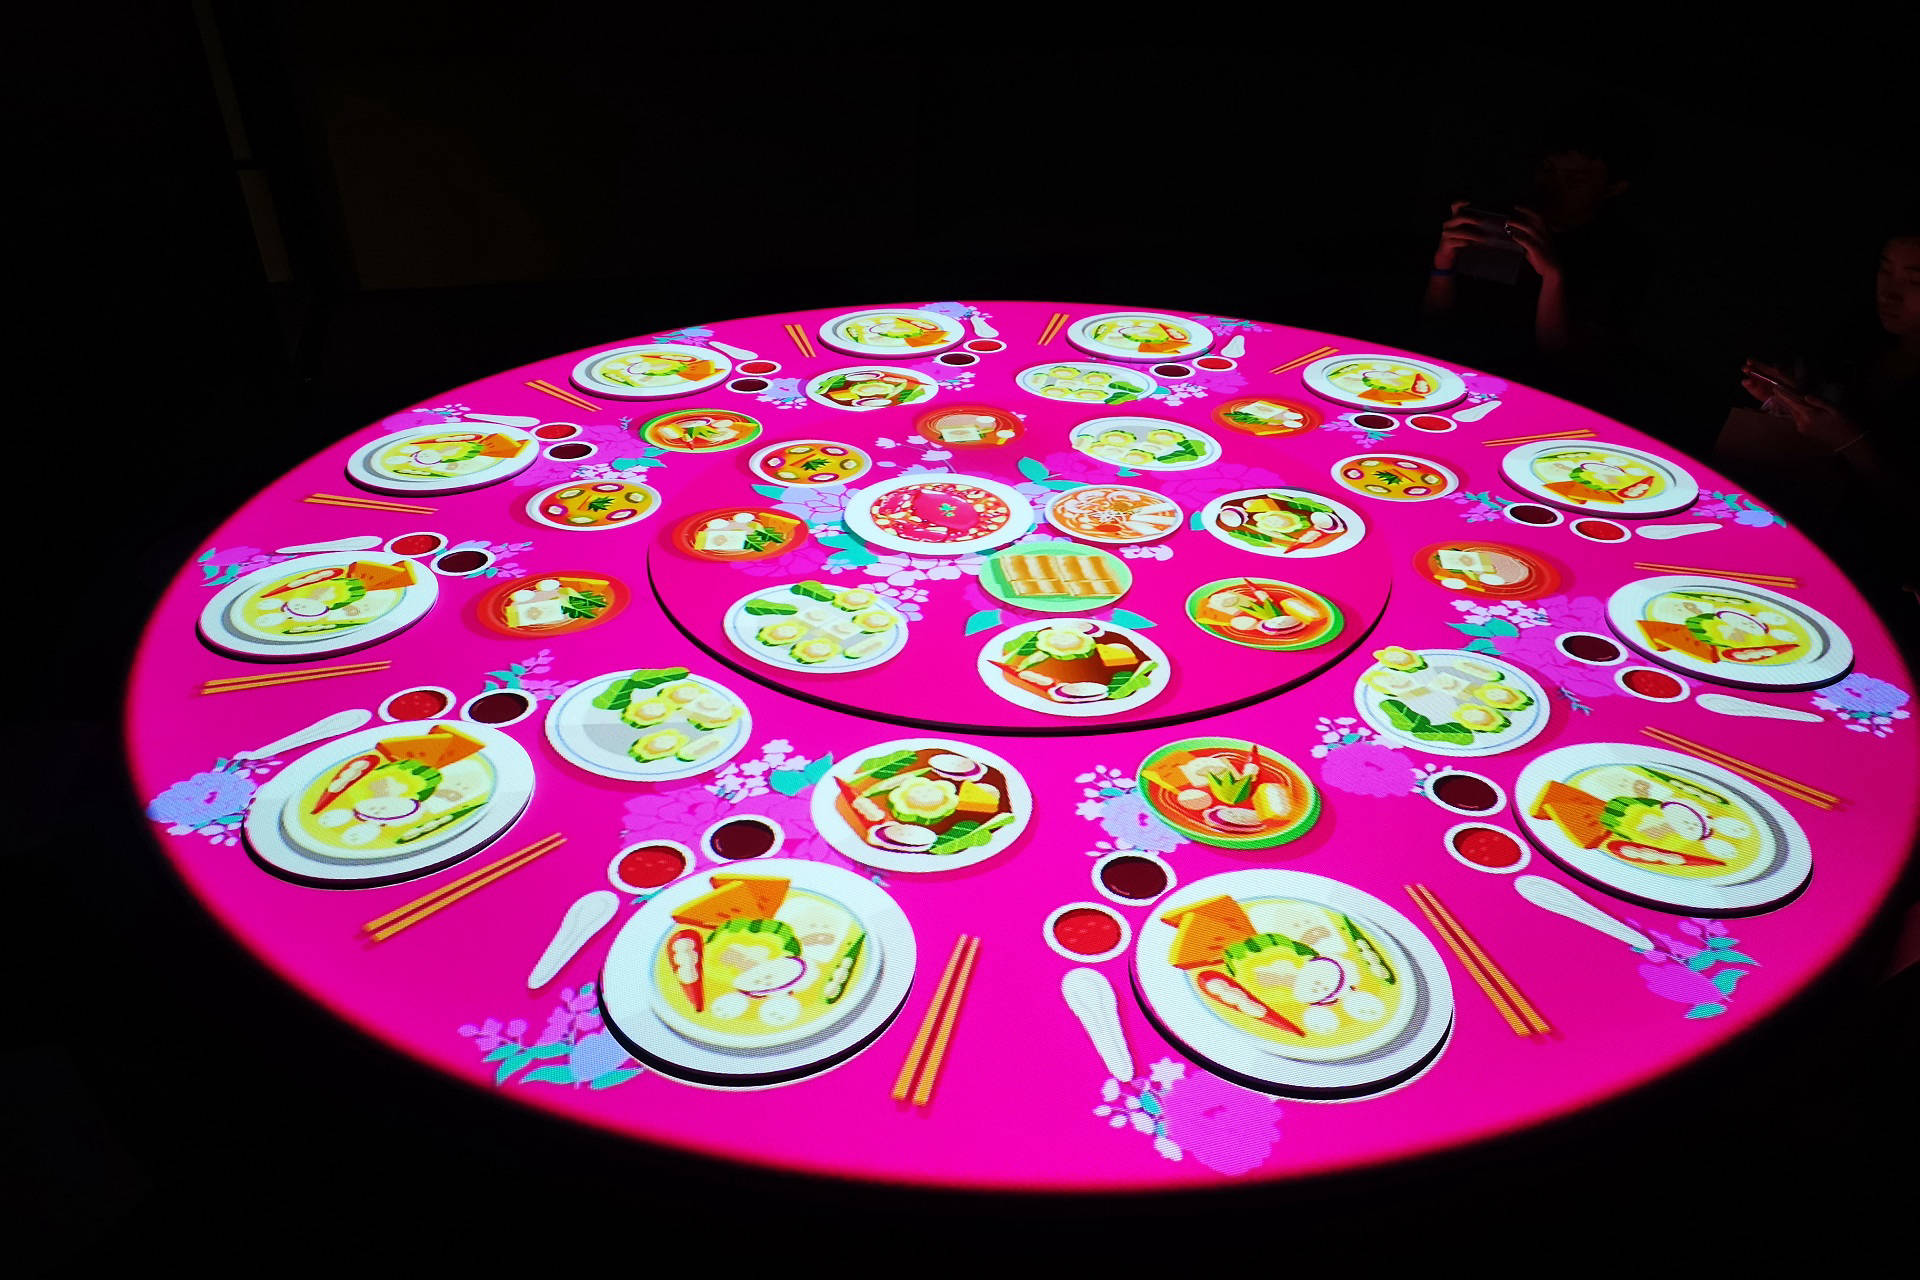 SCCC (Table Projection Mapping)